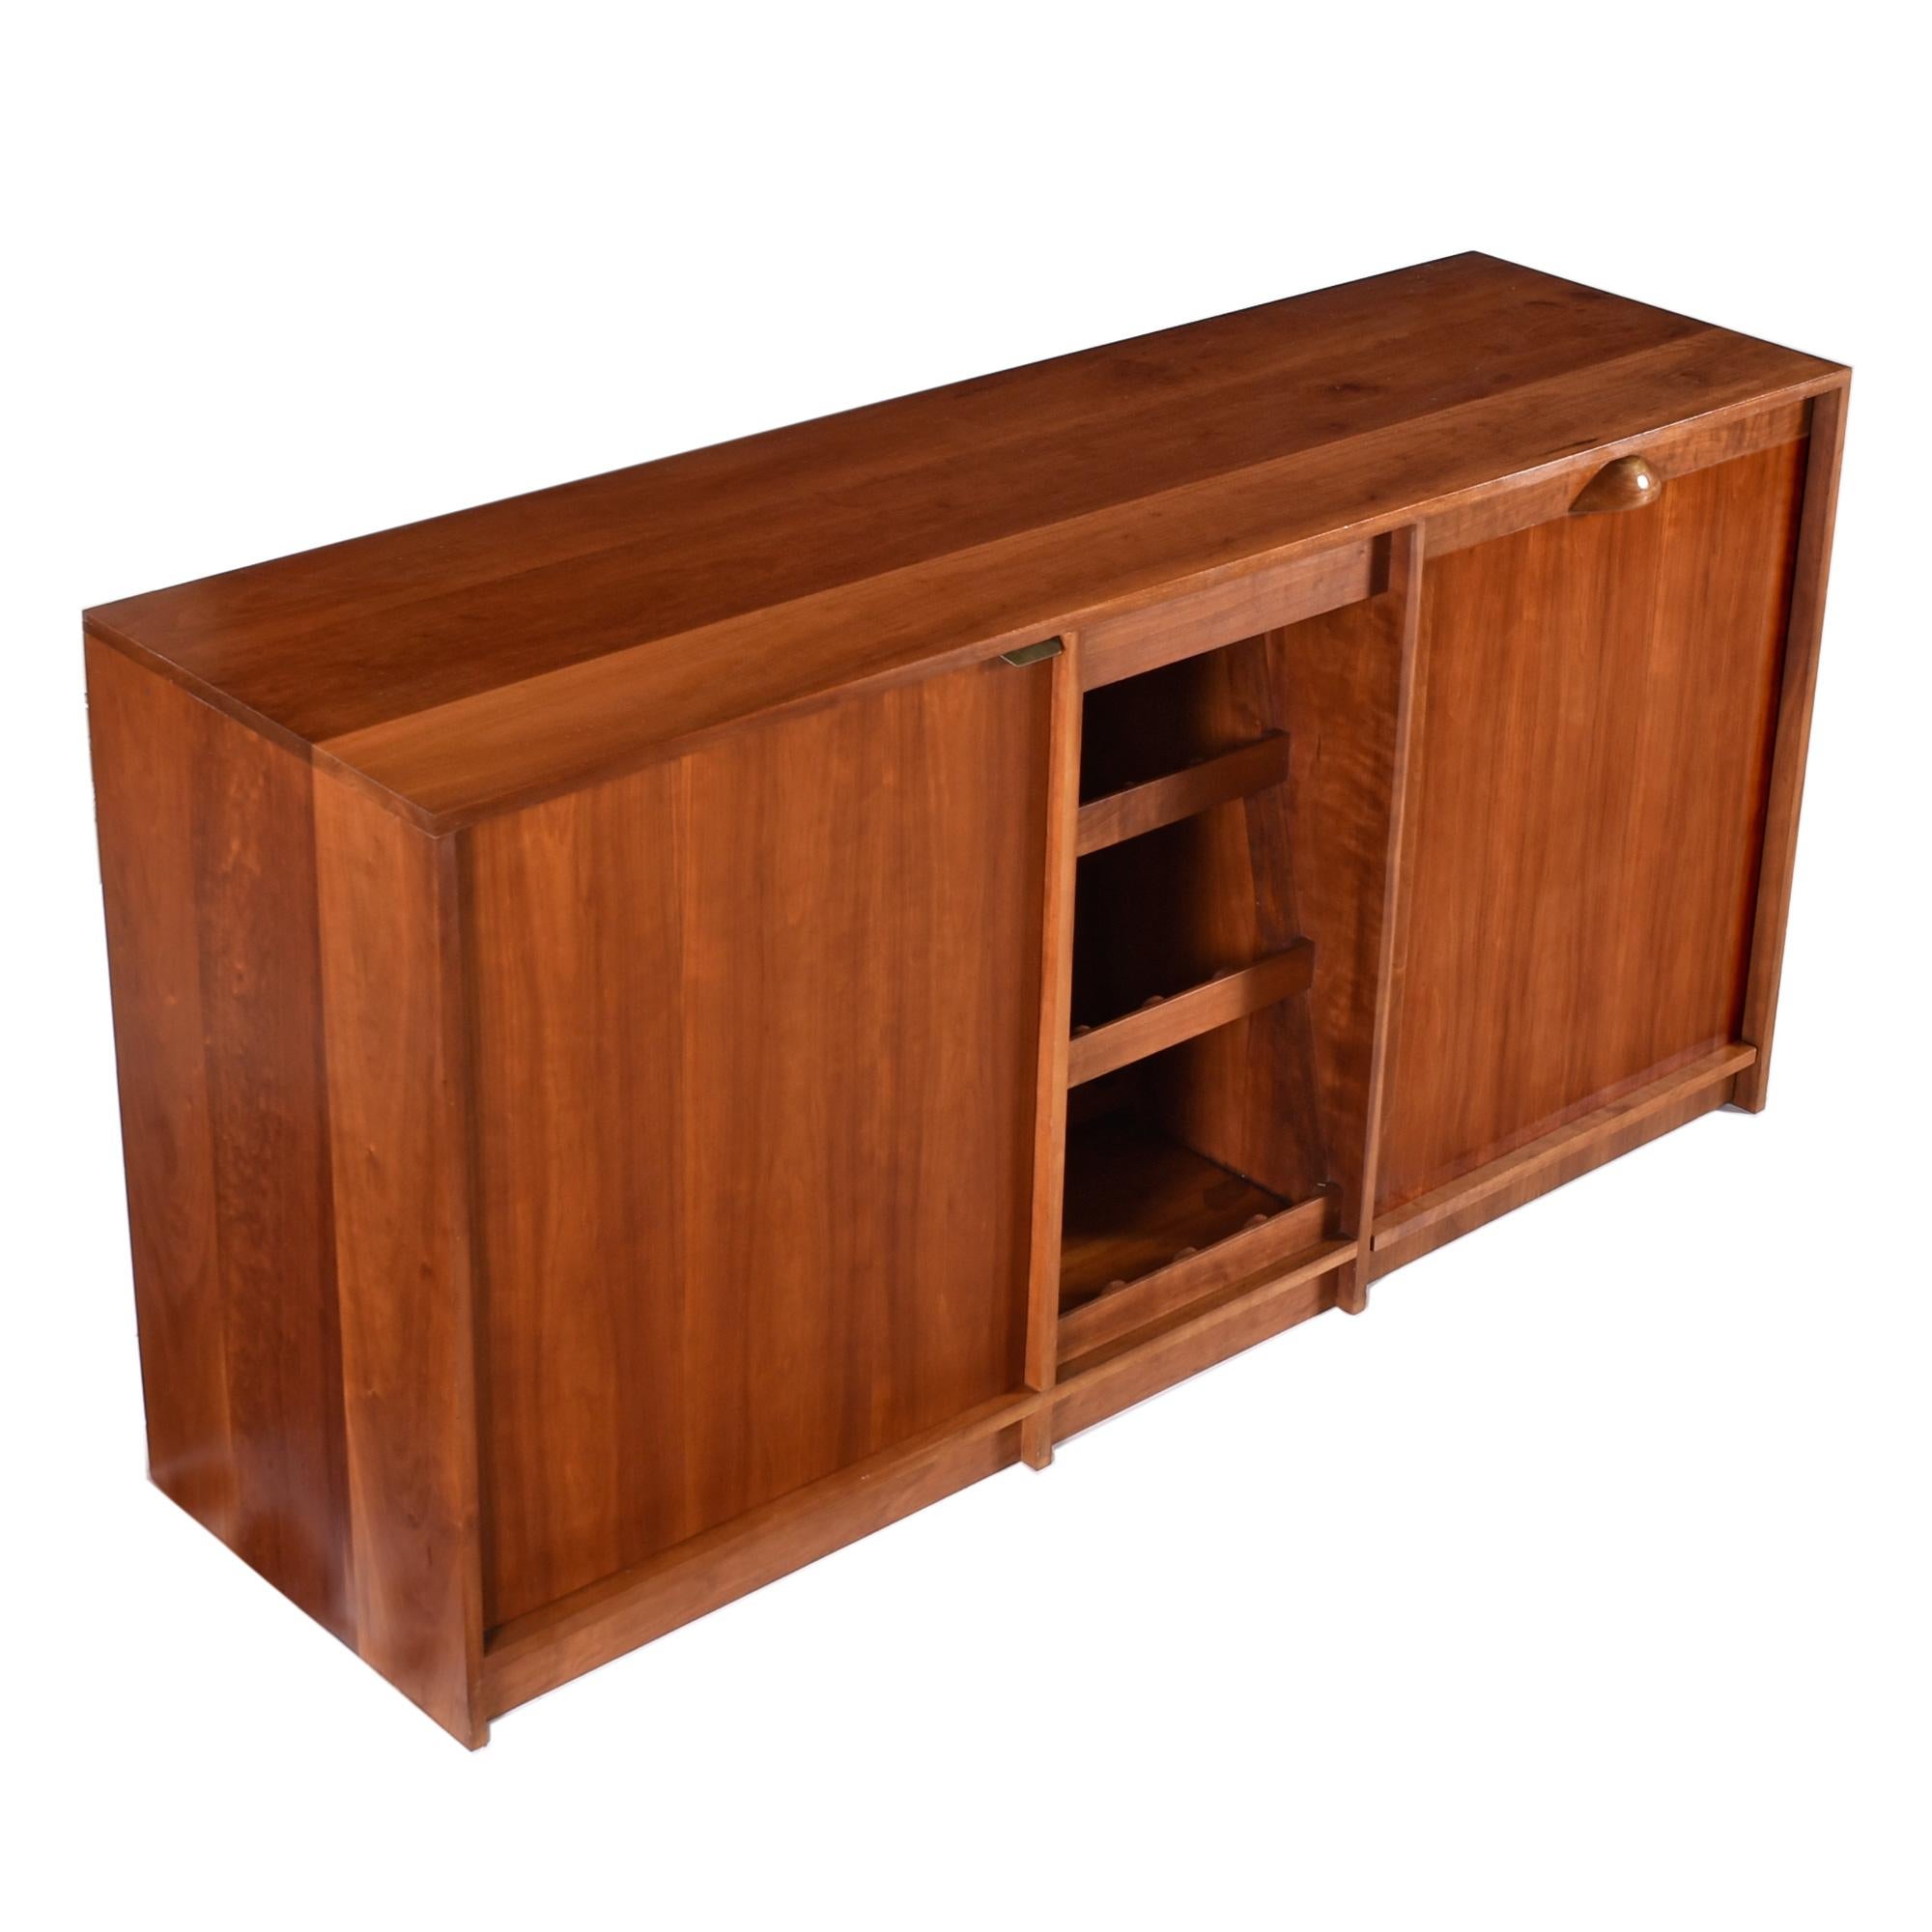 Lighted Custom Made Mid-Century Modern Cherry Wood Credenza Dry Bar In Good Condition For Sale In Chattanooga, TN